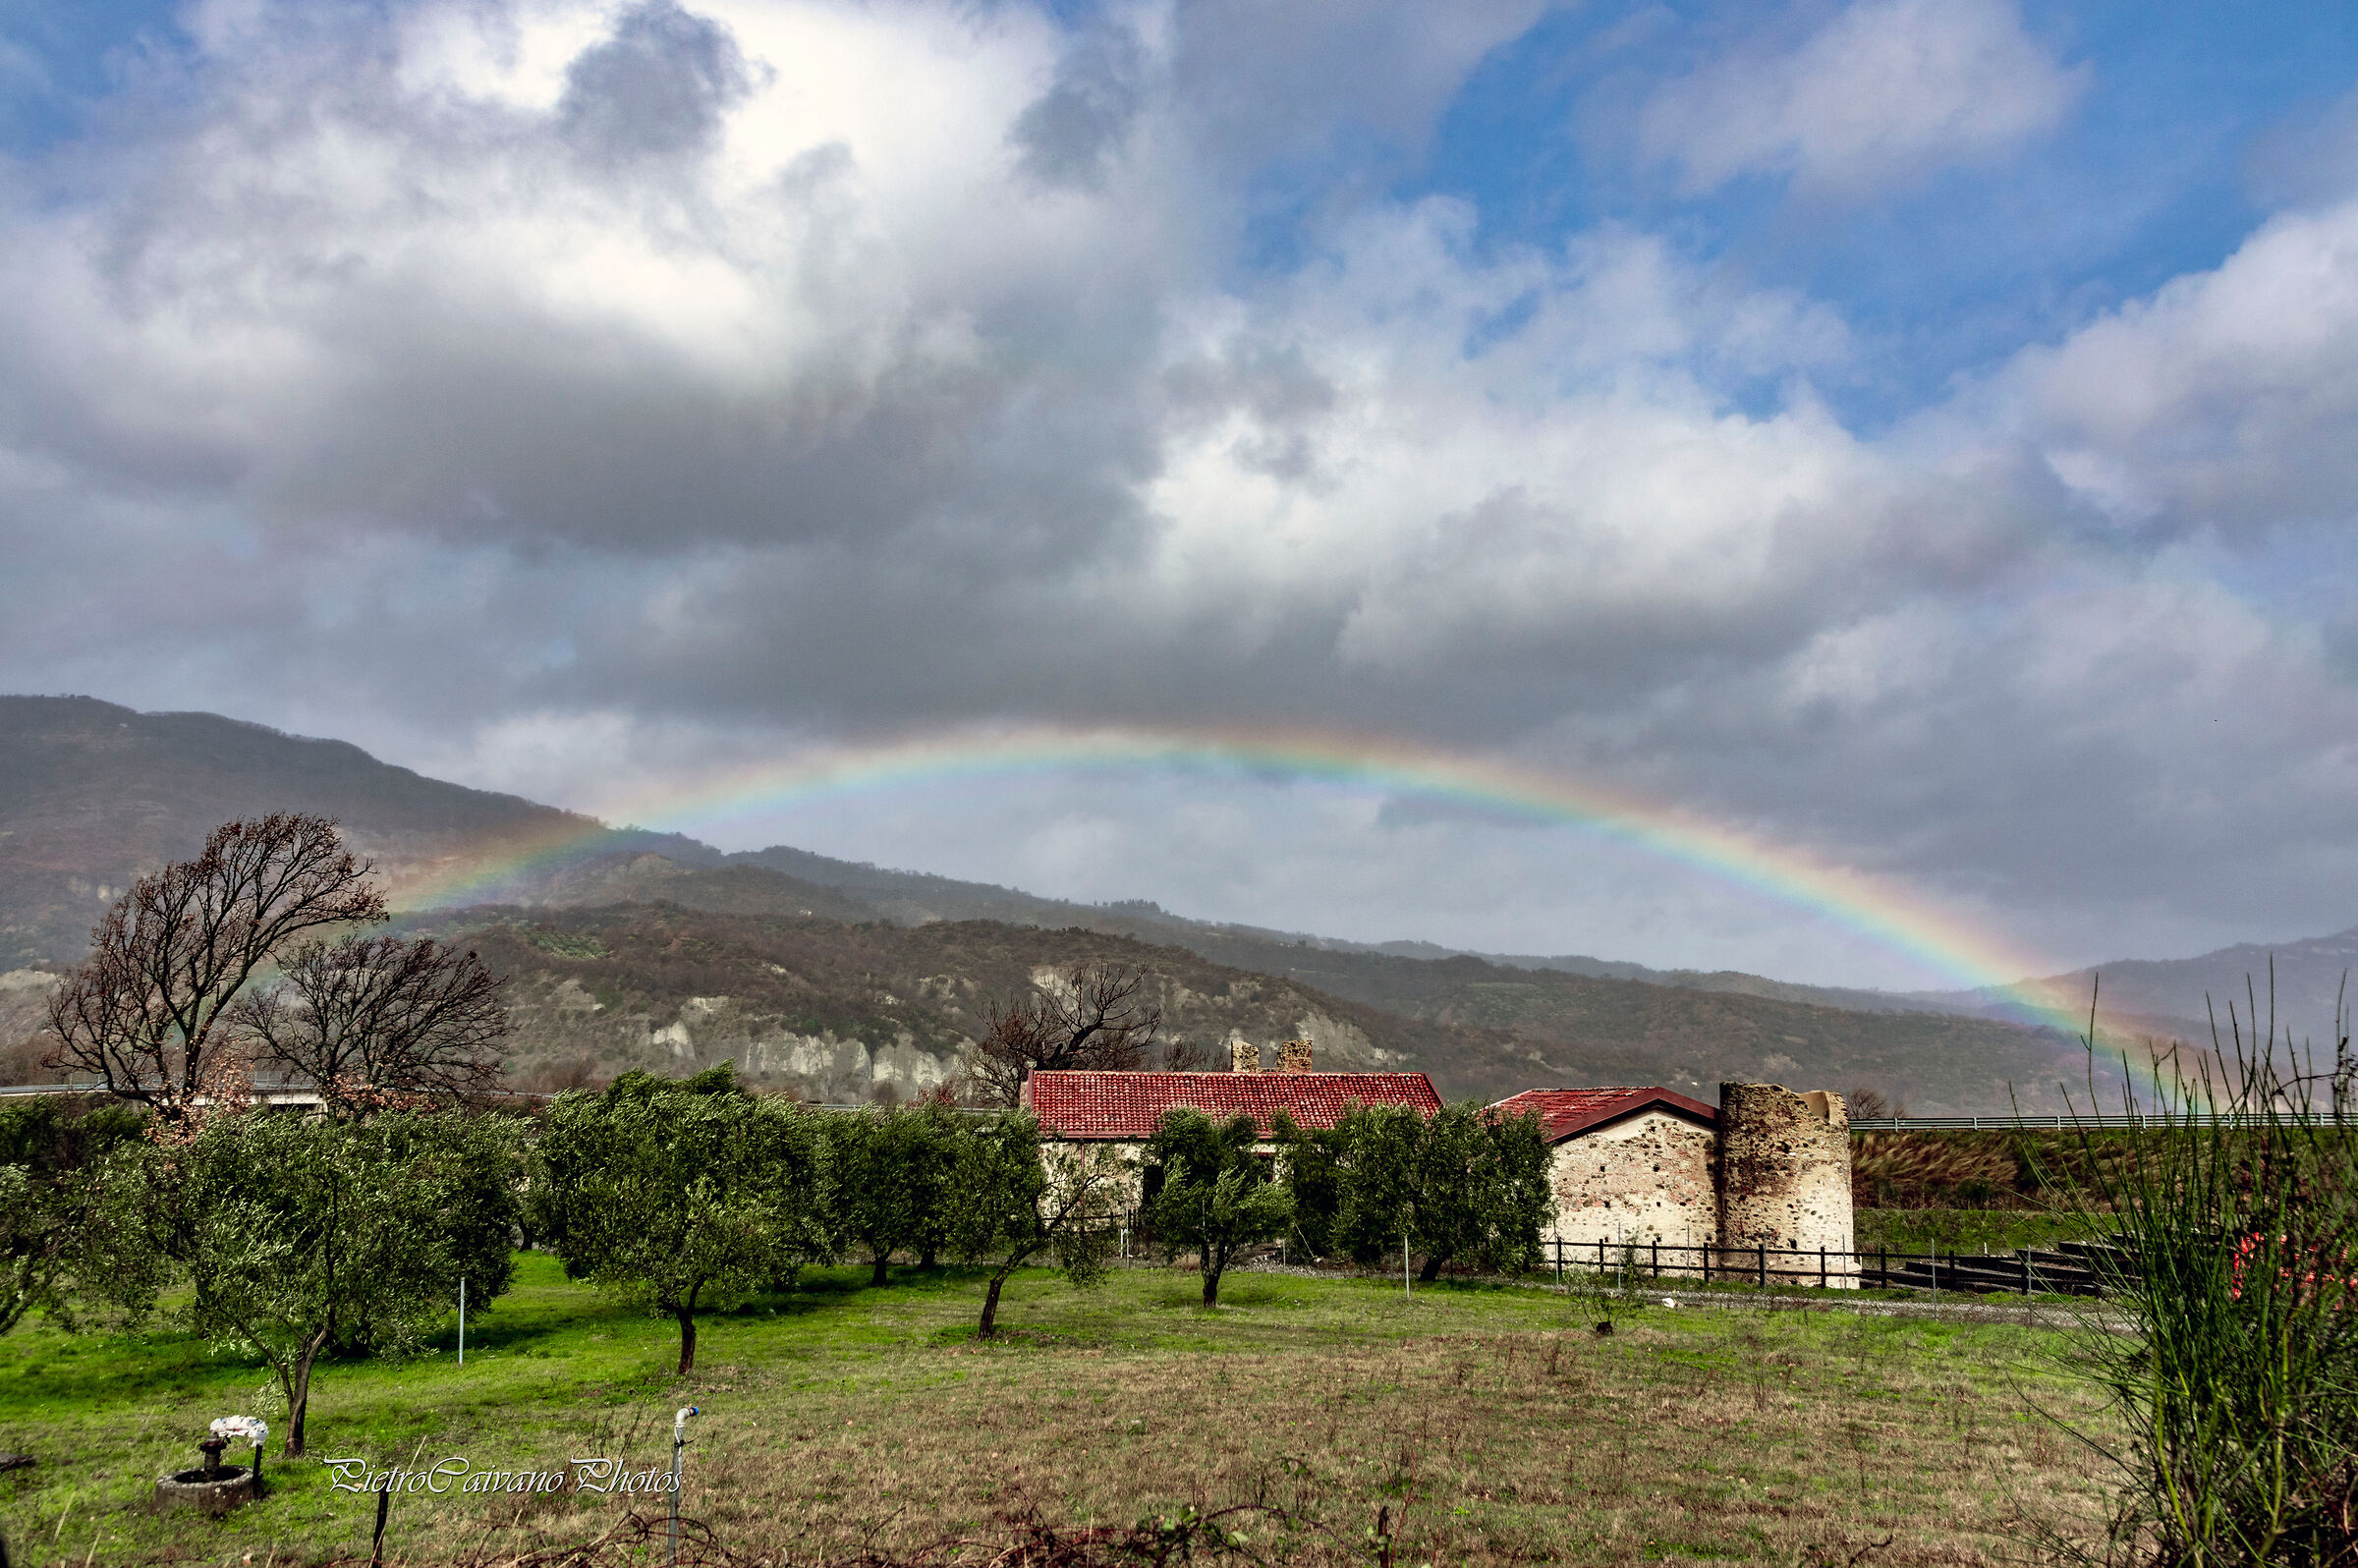 The Rainbow in the Countryside...